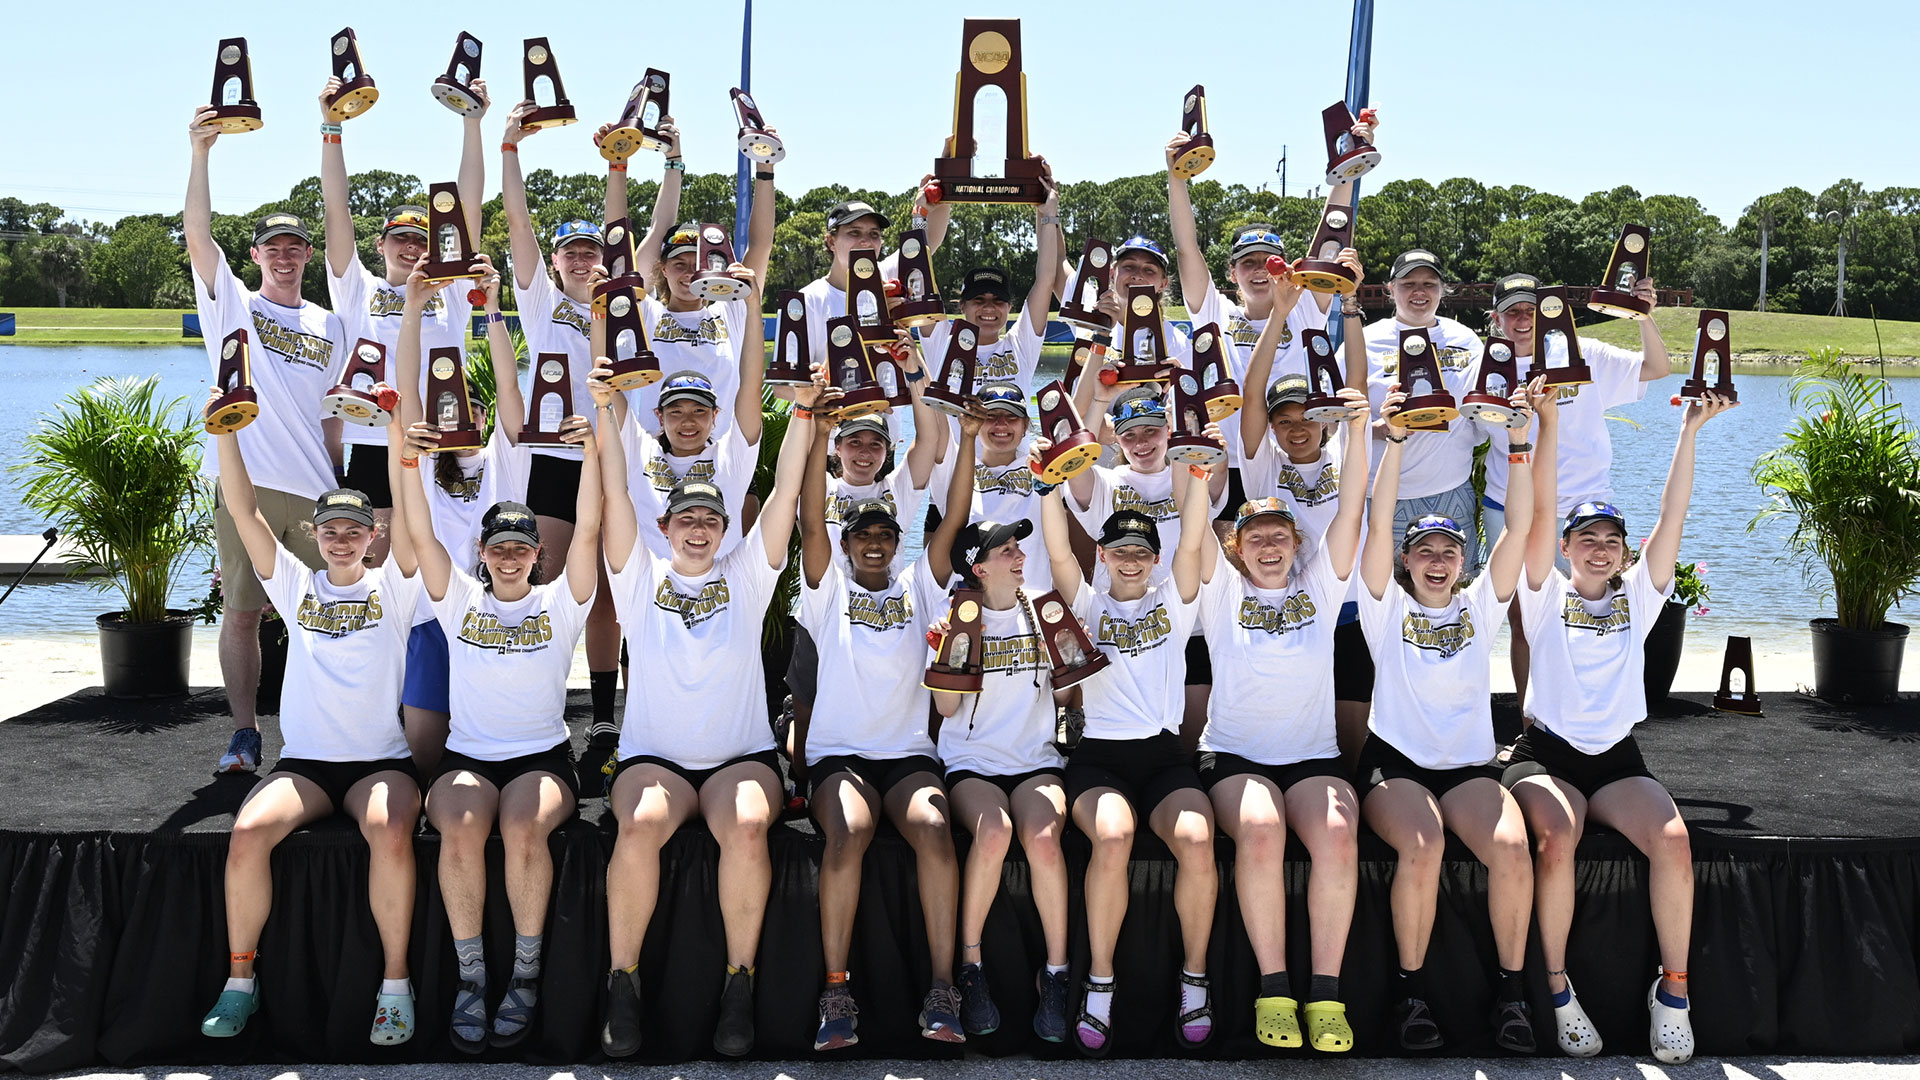 Wellesley Crew win the 2022 NCAA DIII Rowing National Championship (Photo by Mike Janes).